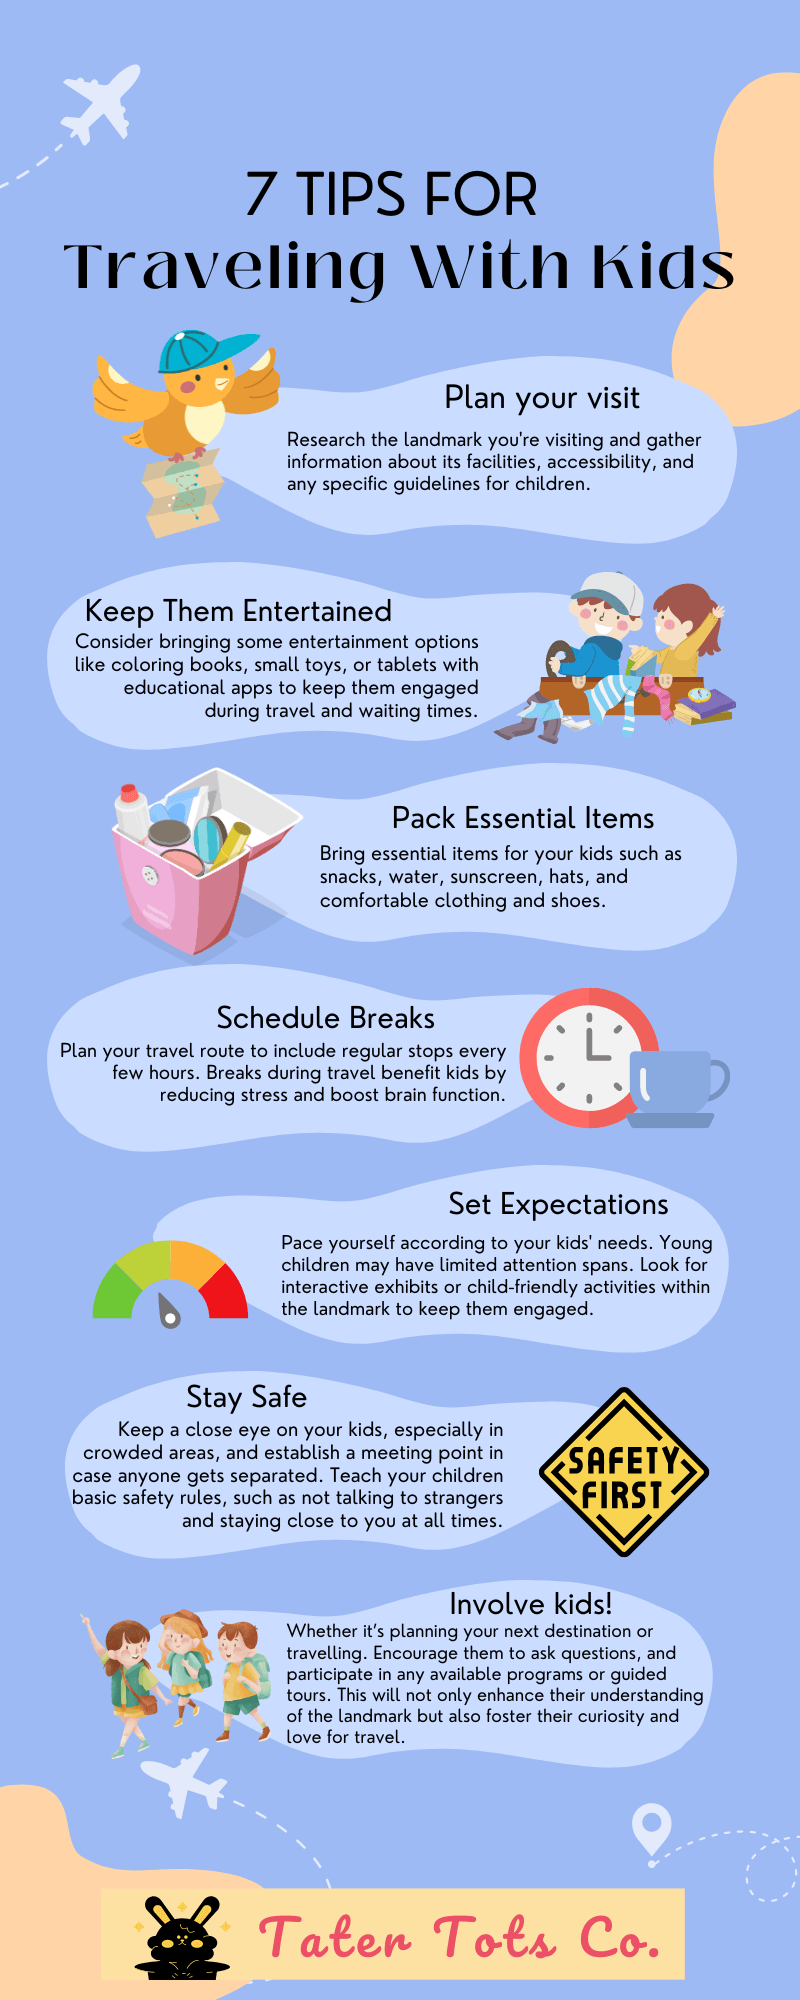 Tips for travelling with kids infographic 001